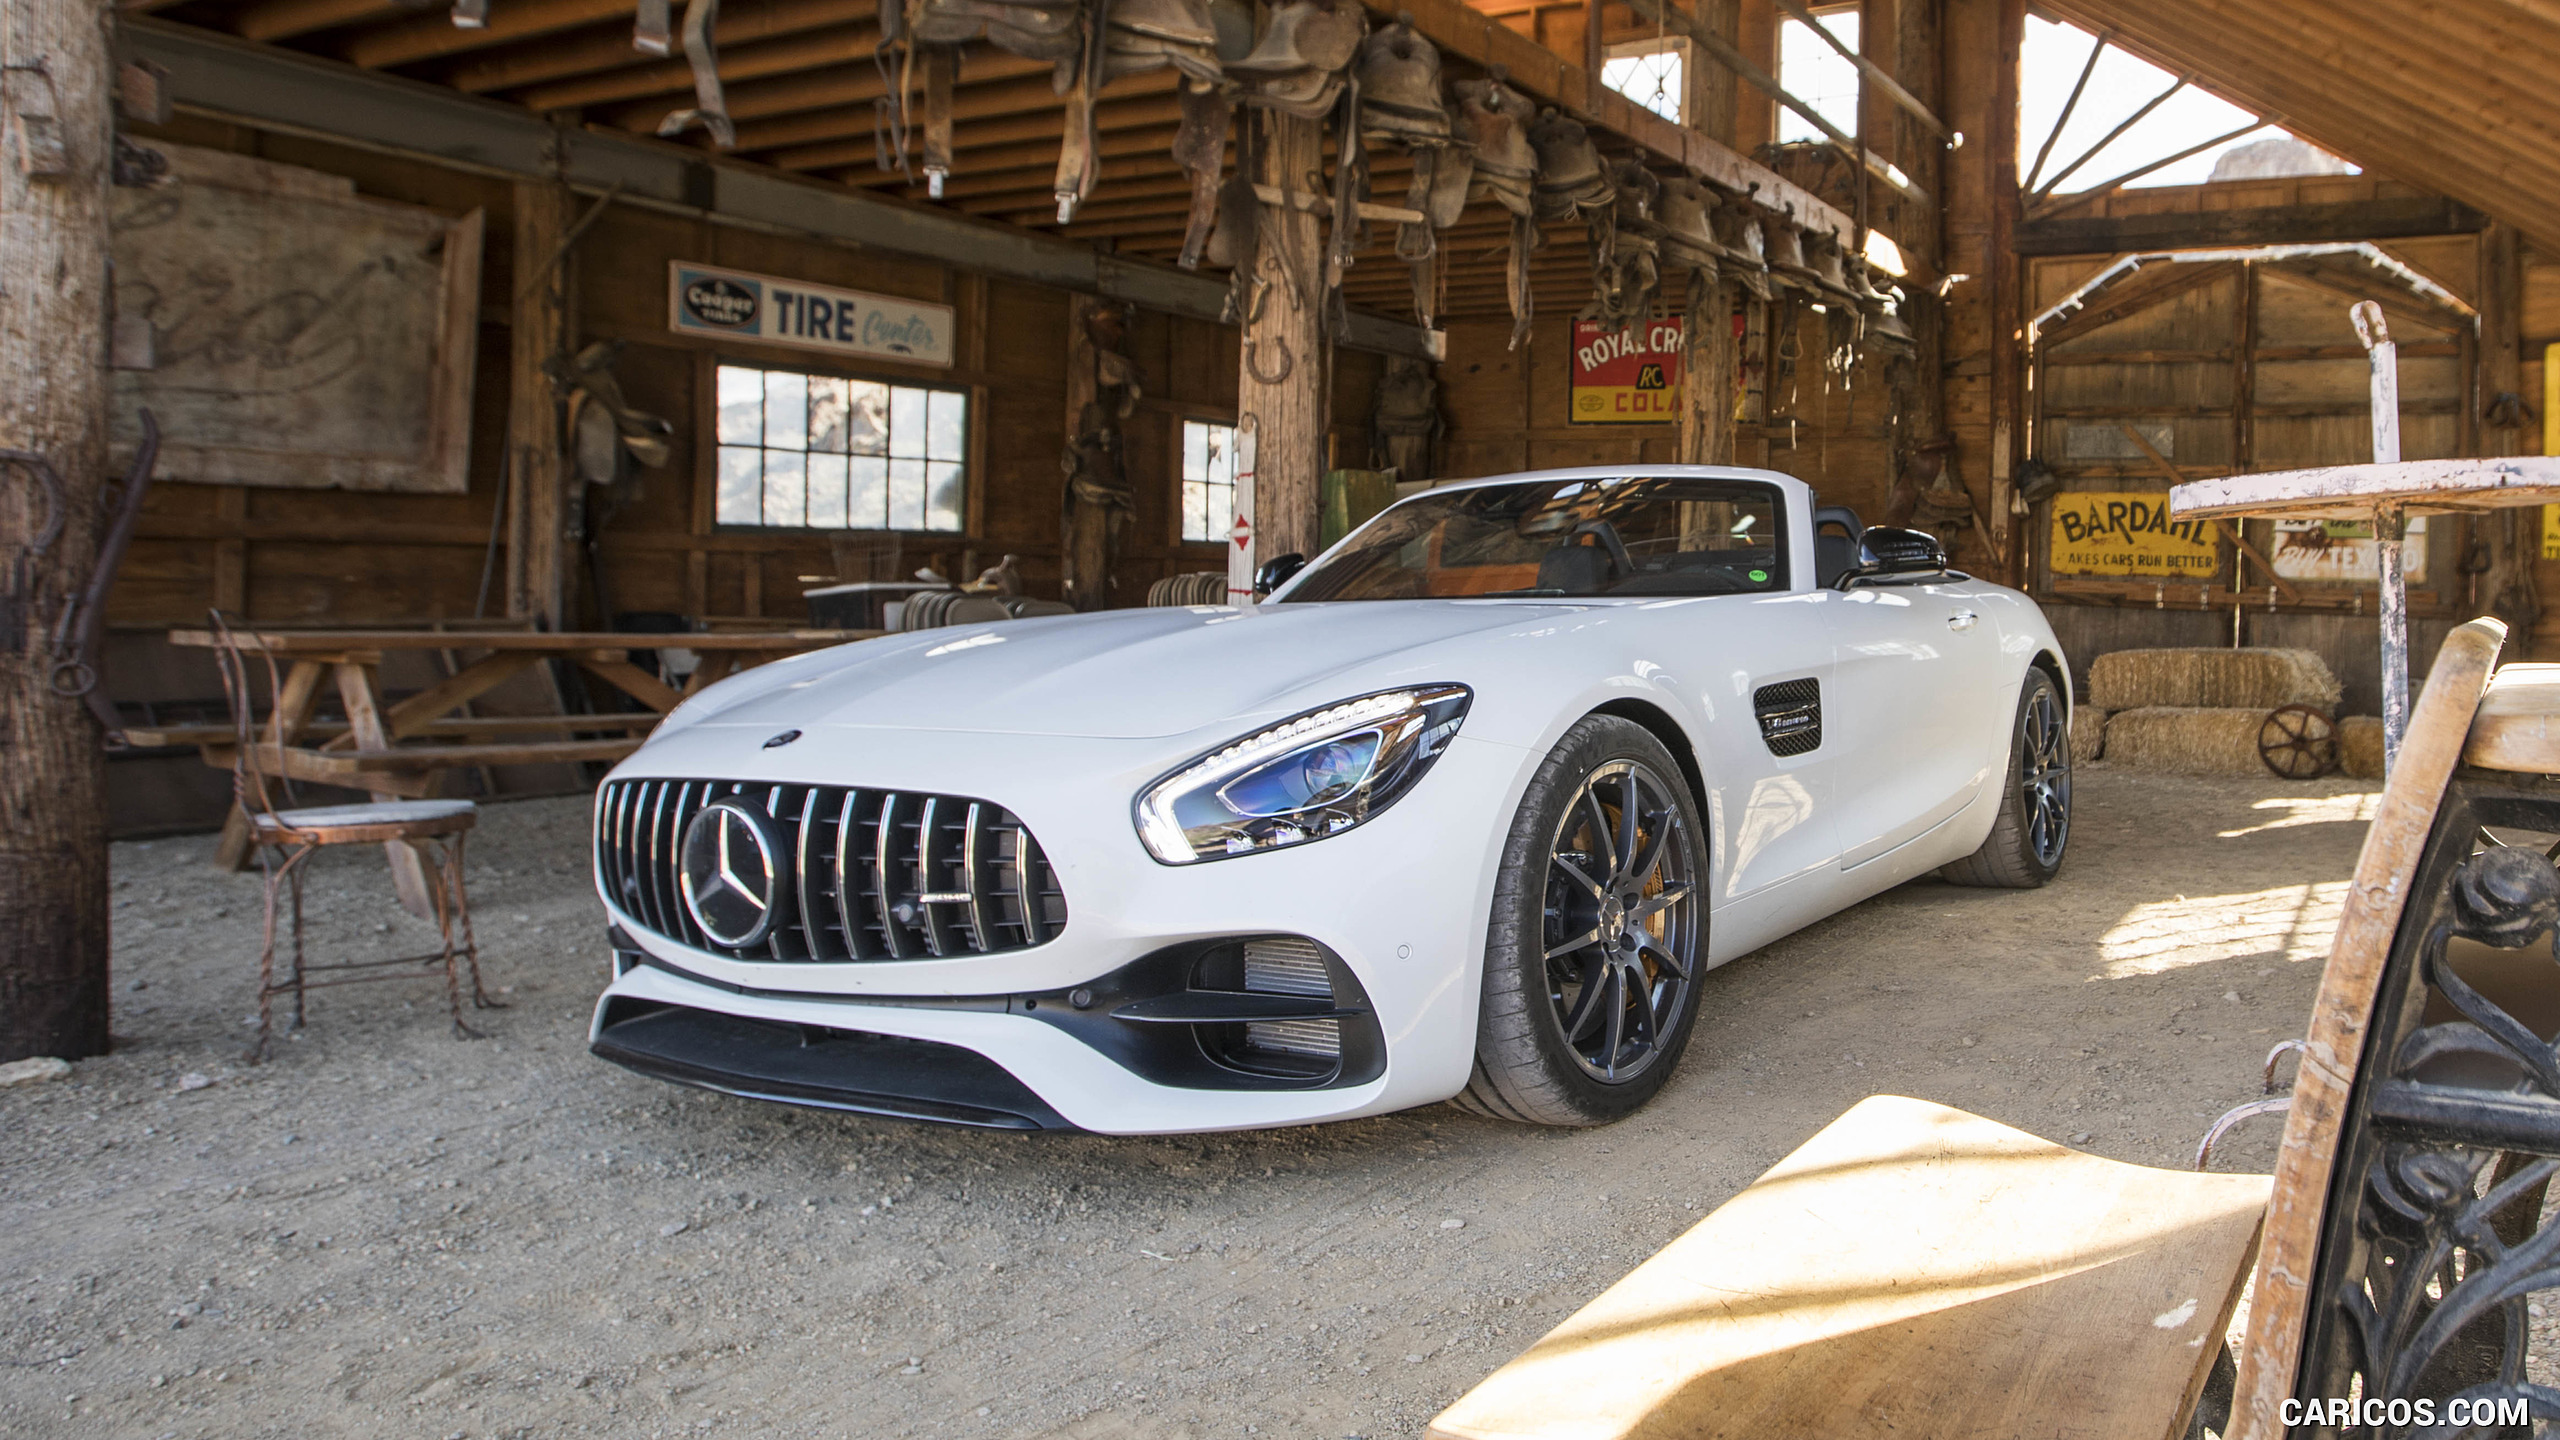 2018 Mercedes-AMG GT Roadster - Front Three-Quarter, #87 of 350